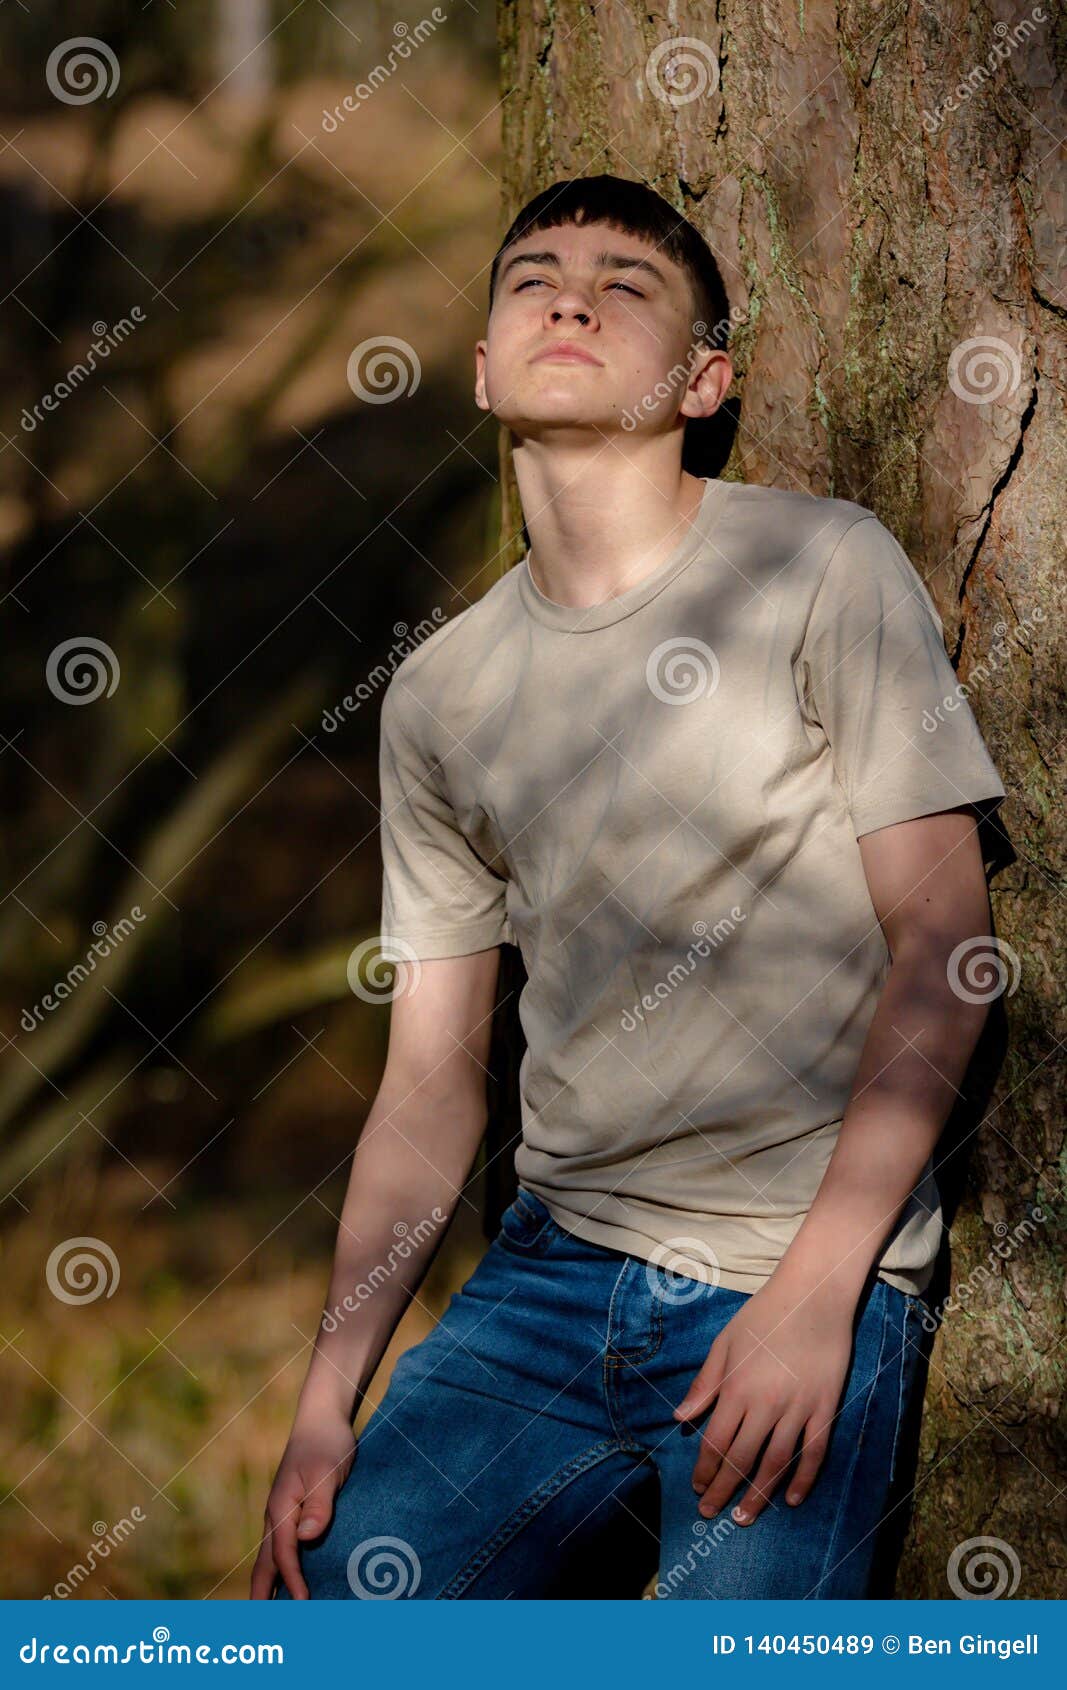 Teenage Boy Outside on a Bright Spring Day Stock Image - Image of lean ...